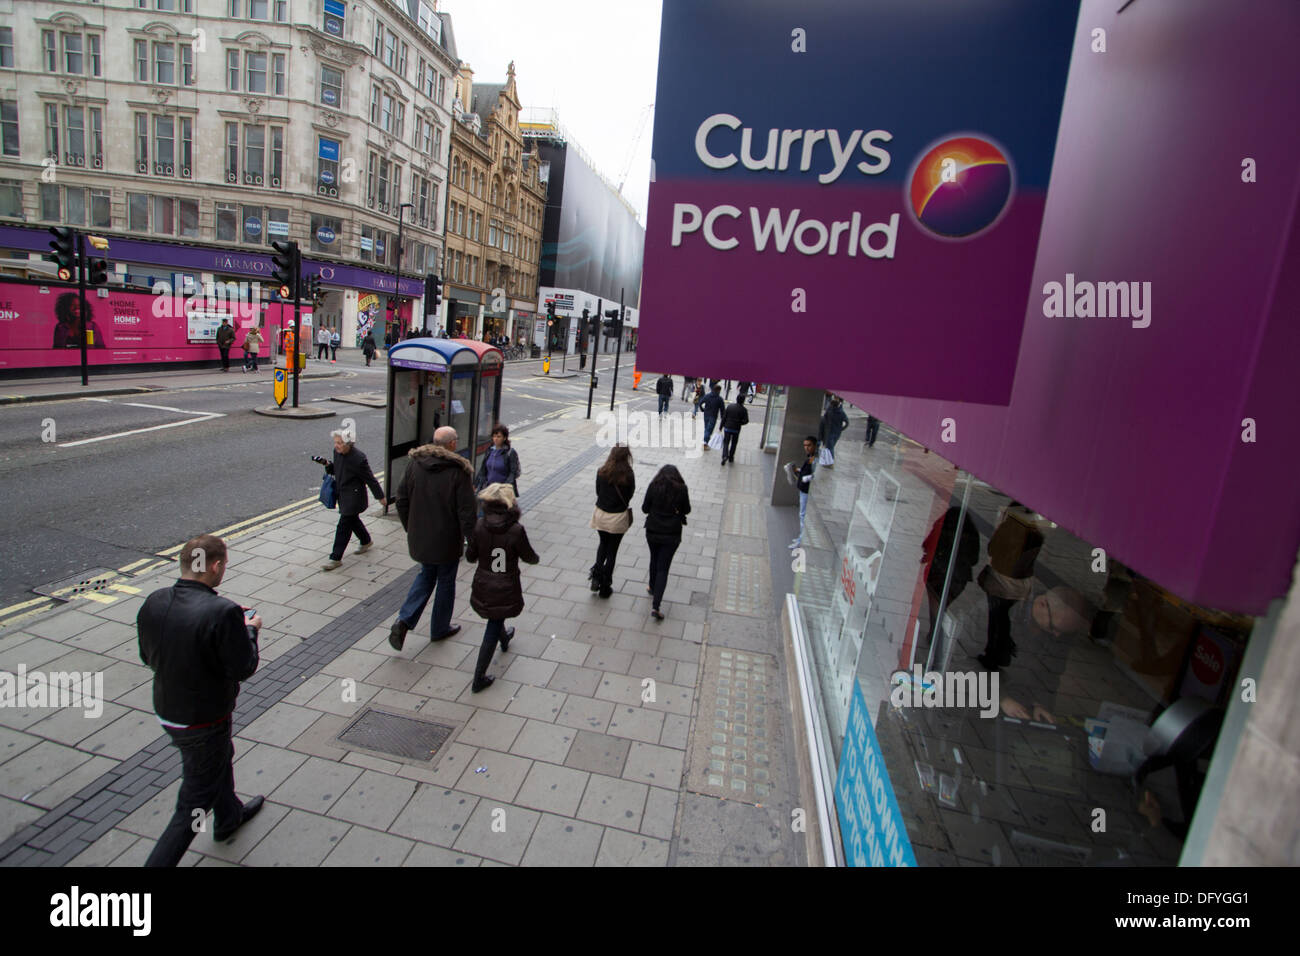 Currys PC world Oxford Street London electrical goods retailer Stock Photo